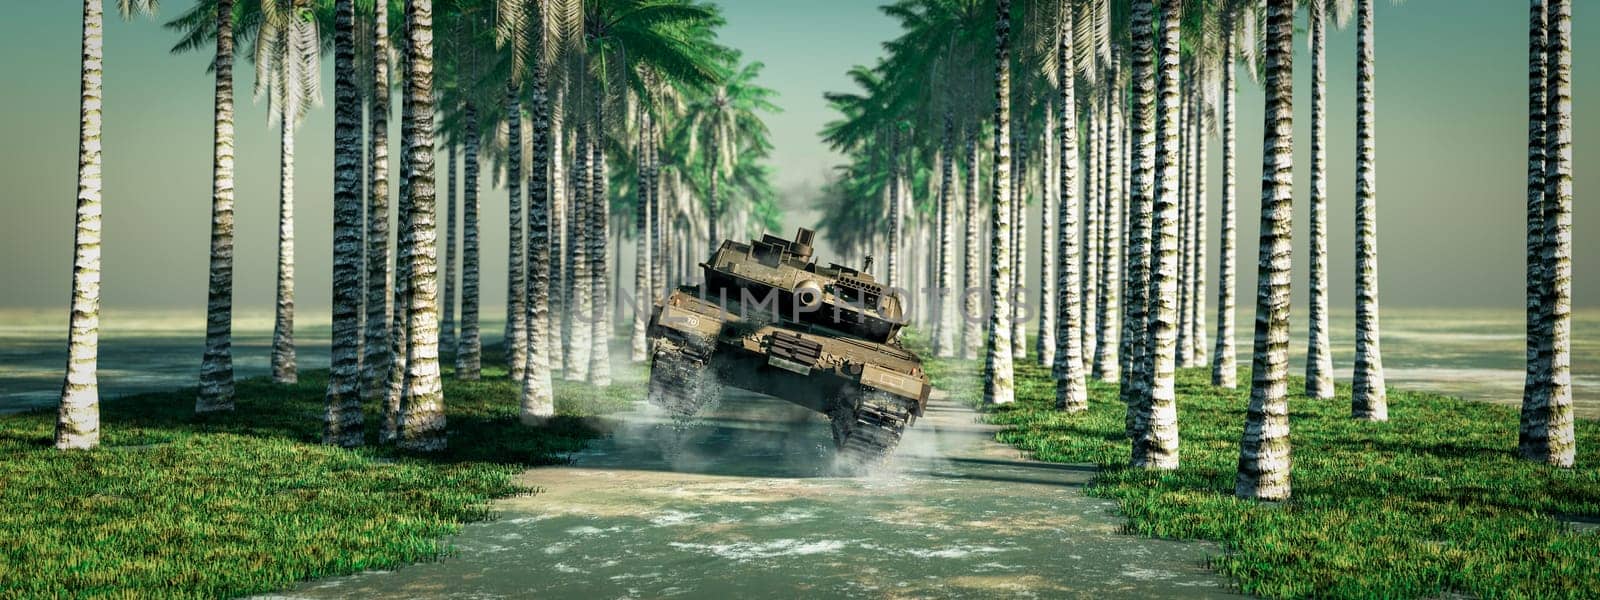 Armored Military Tank Advancing Through a Serene Palm Grove by Juanjo39